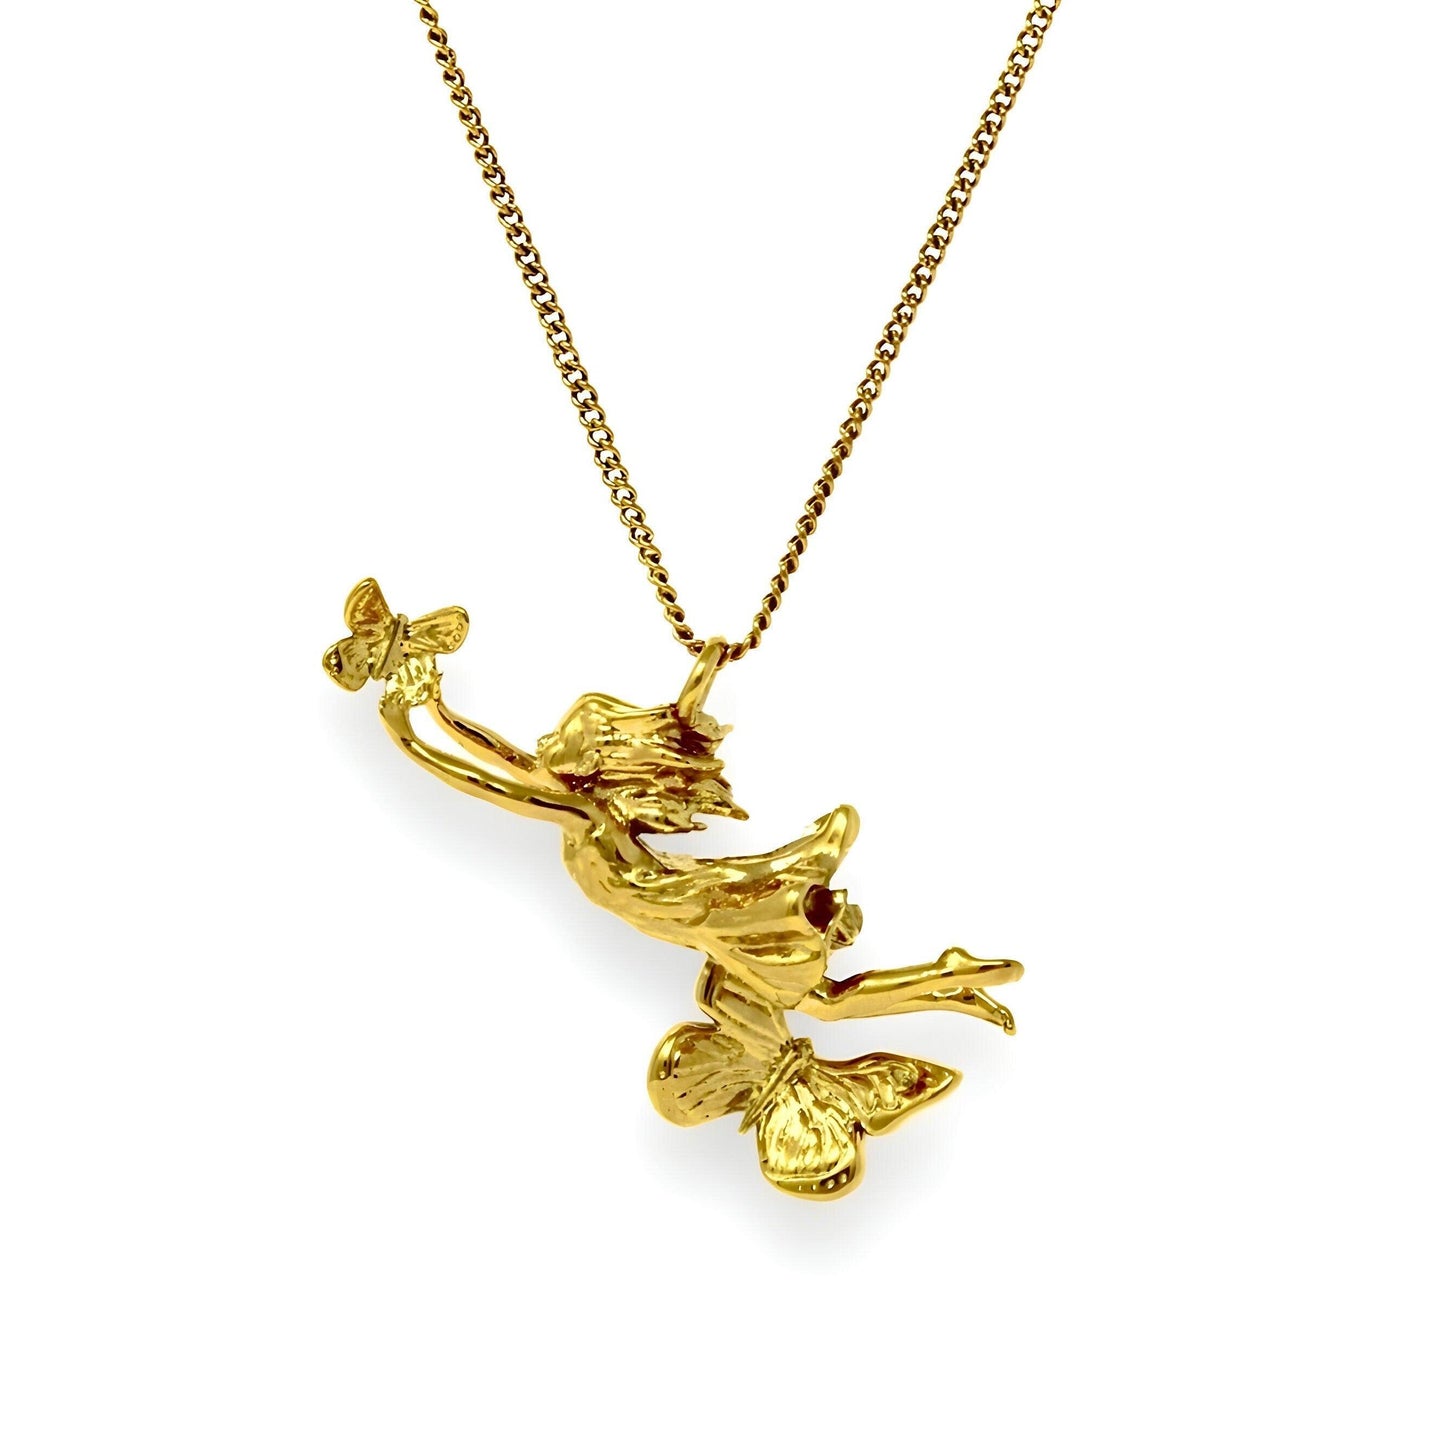 Unique Pendant Necklace "Lift Her with Butterflies" - Gold Gift, Gift For Mom, Artistic, Jewelry